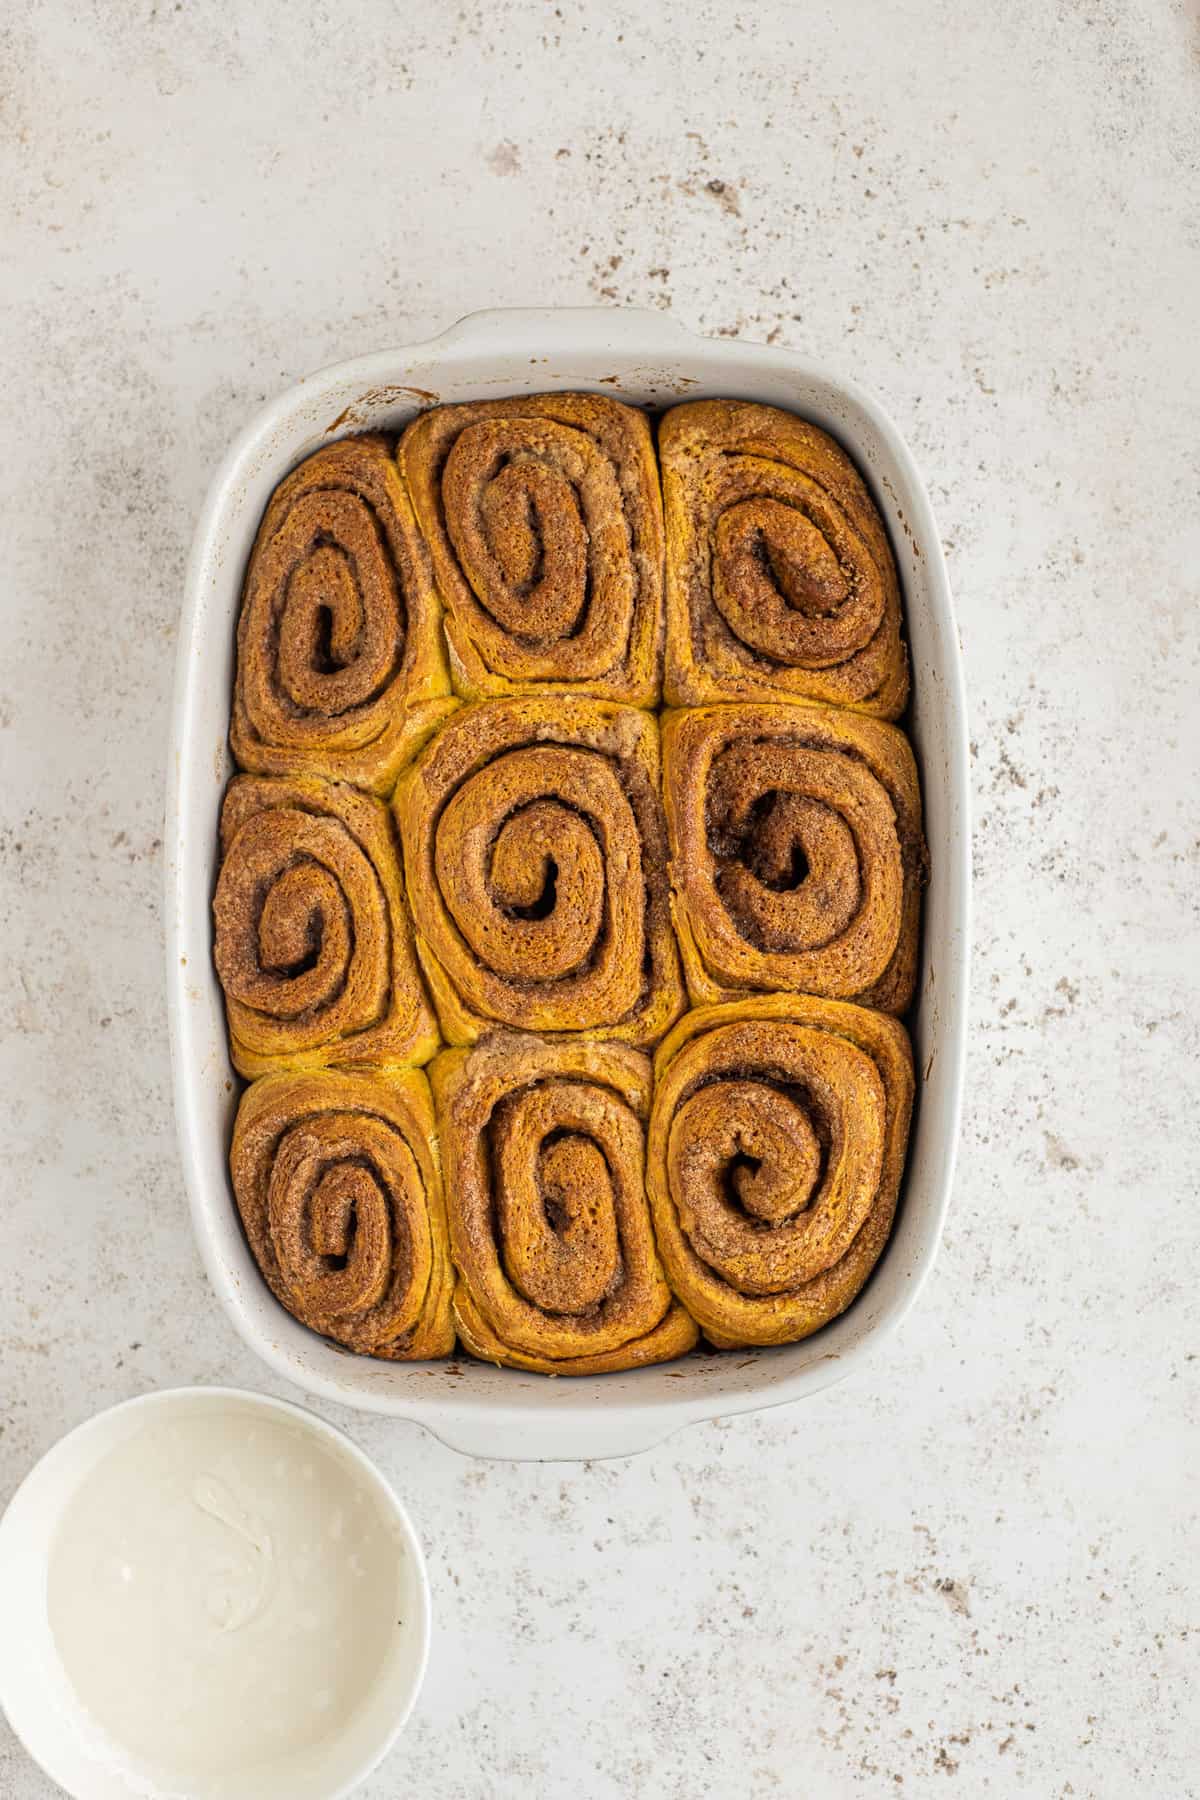 Baked unfrosted cinnamon rolls.